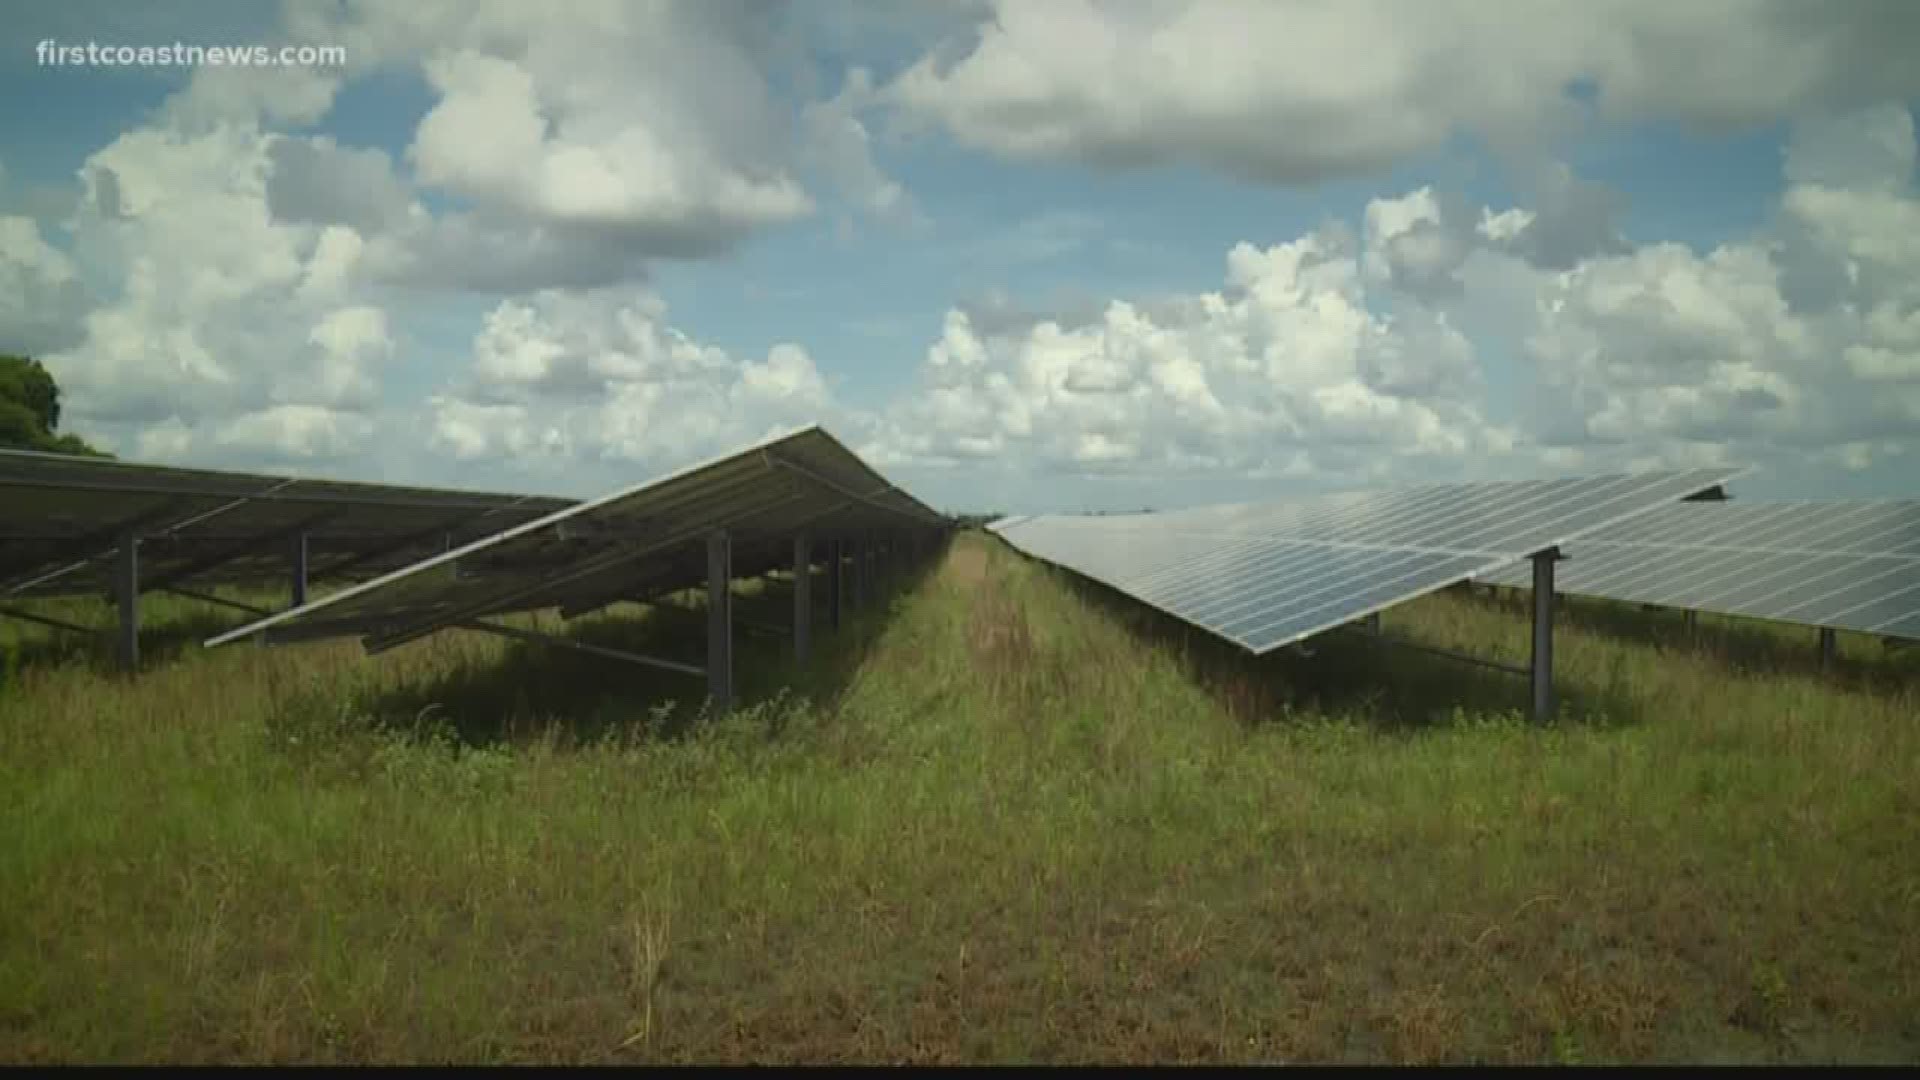 The Florida Power & Light utility plans to unveil "Solar Together," a subscription program giving customers access to solar-sourced power without need of equipment